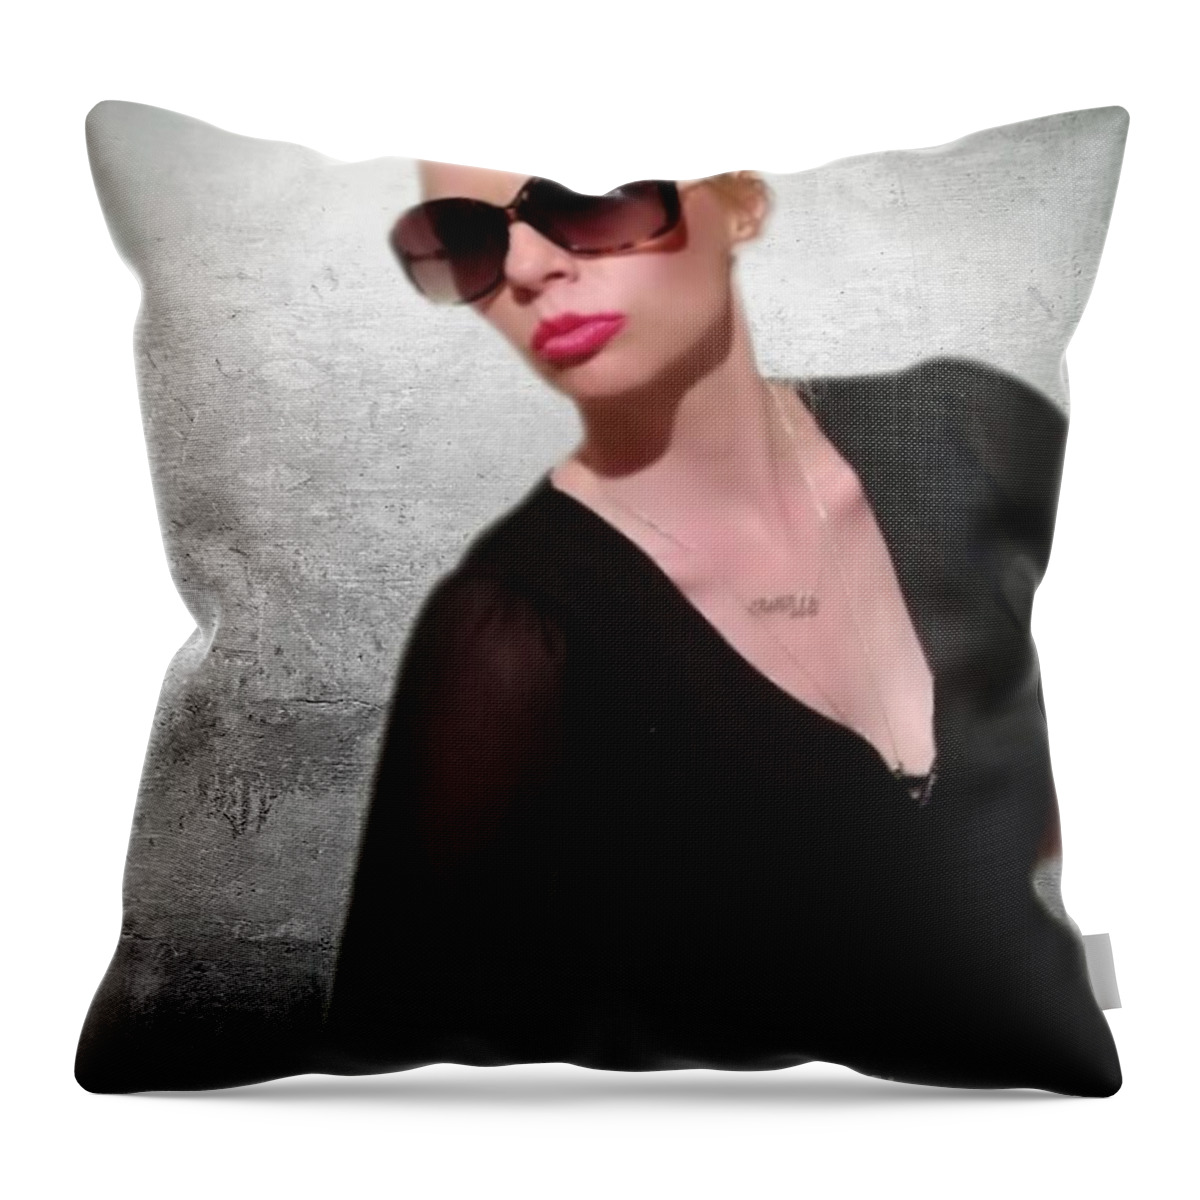 Portret Throw Pillow featuring the photograph Portret Actress Yvonne Padmos #6 by Yvonne Padmos